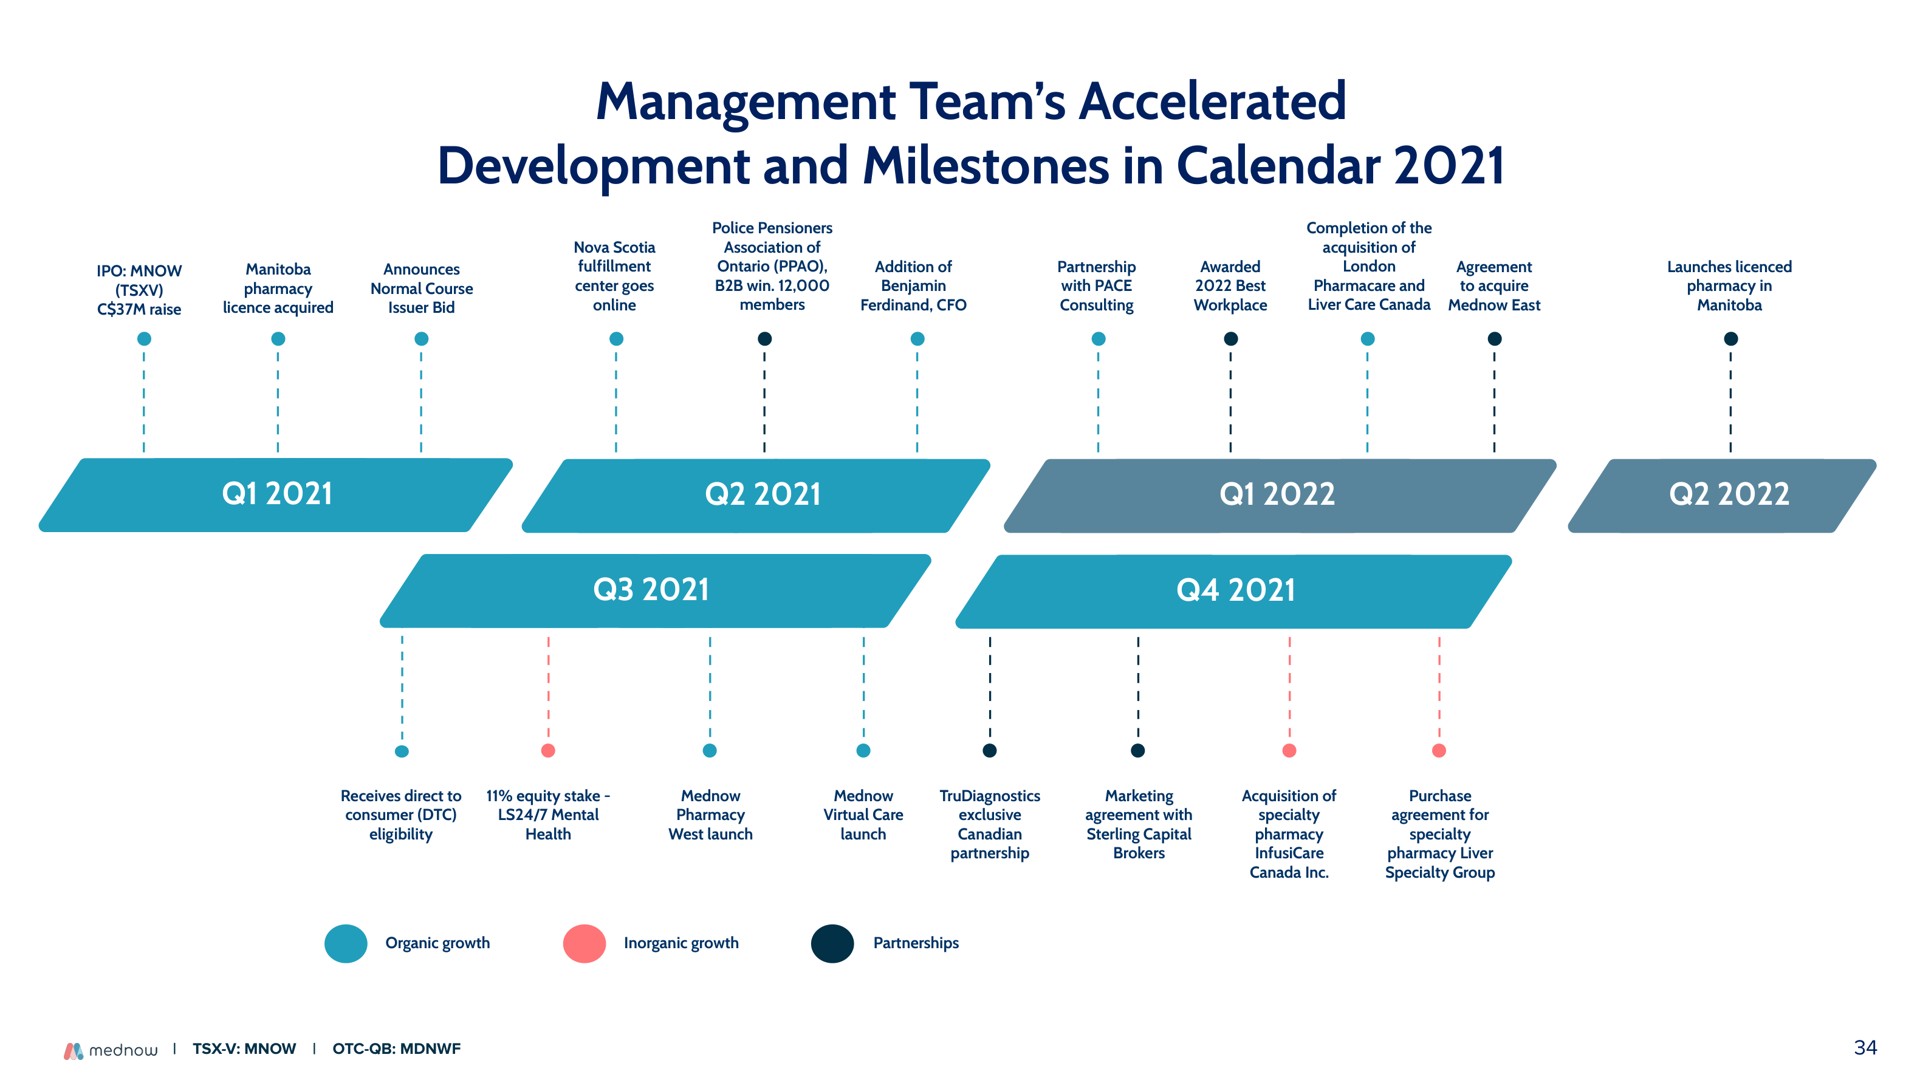 management team accelerated development and milestones in calendar note to please add milestones for in this order partnership with pace consulting awarded best workplace completion of the of and liver care canada agreement to acquire pharmacy in east | Mednow